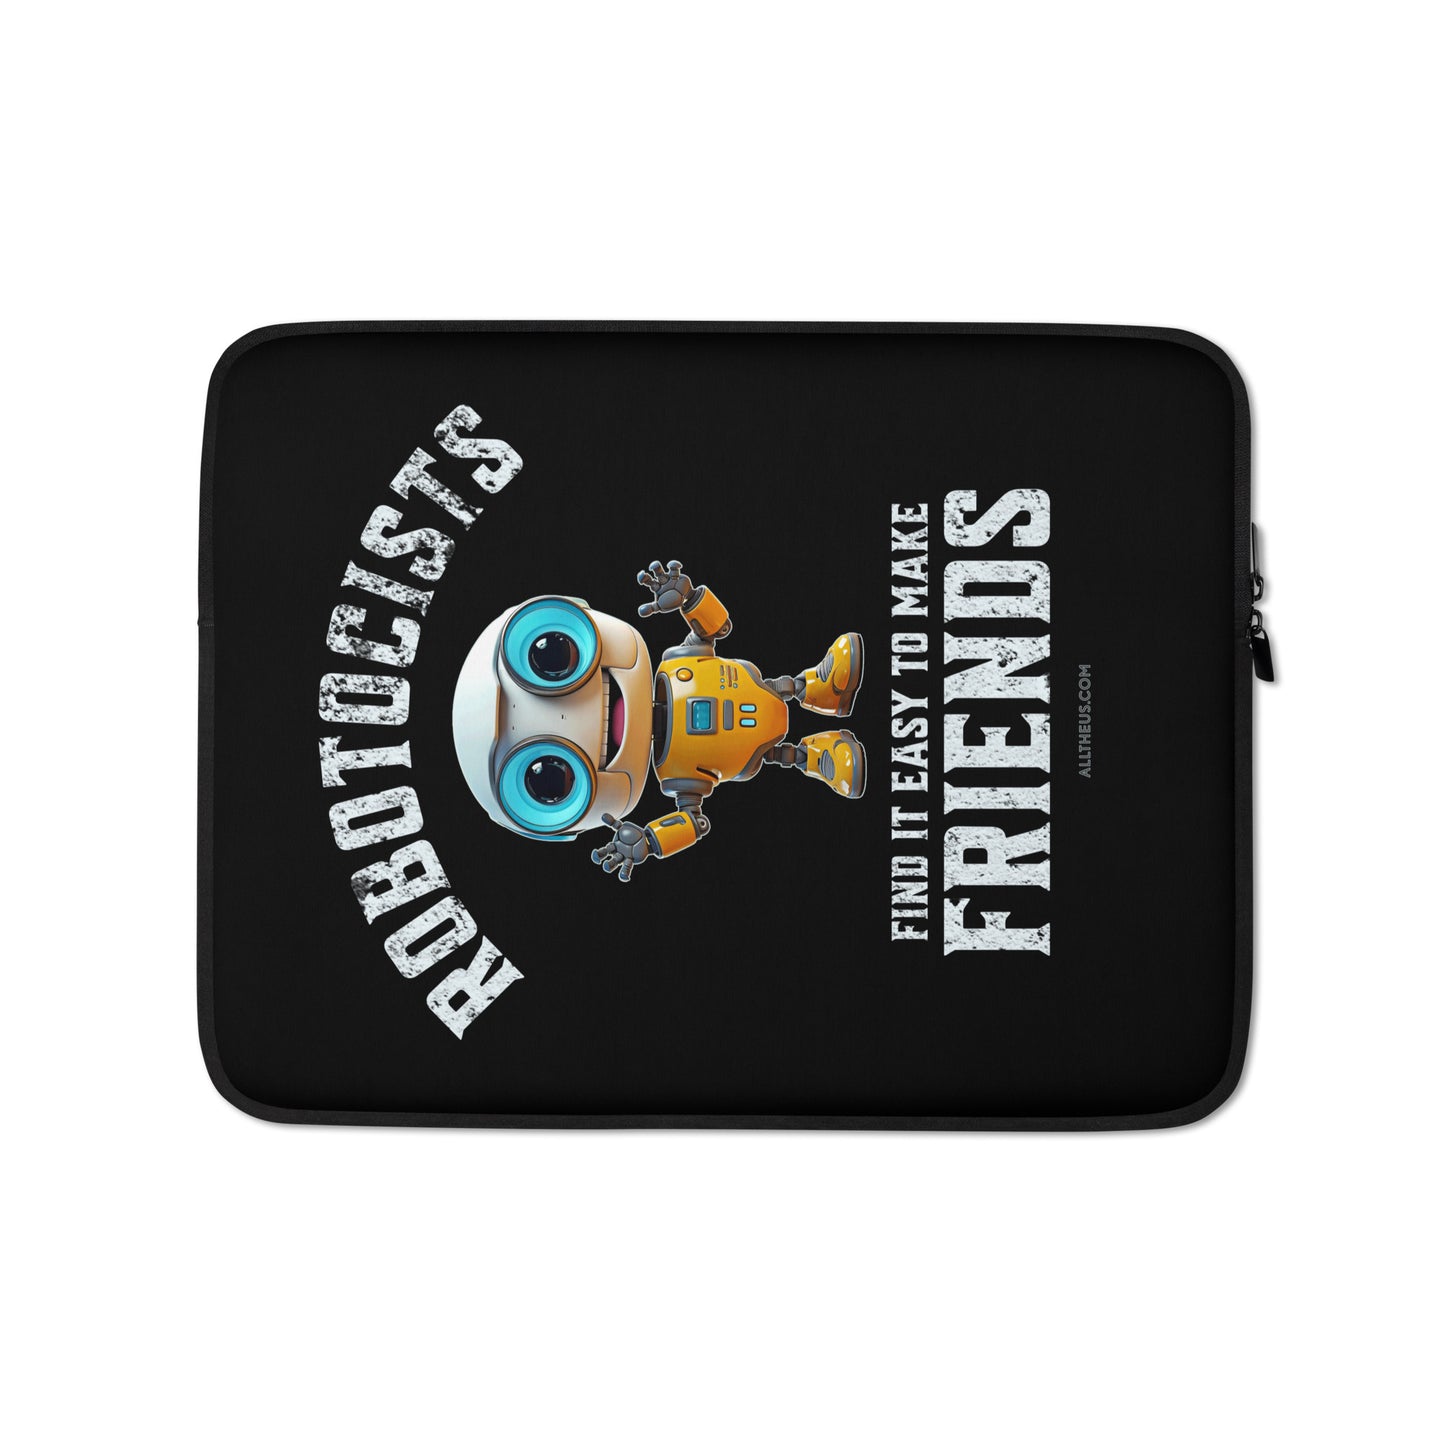 Laptop Sleeve - Robotocists Make Friends Easily